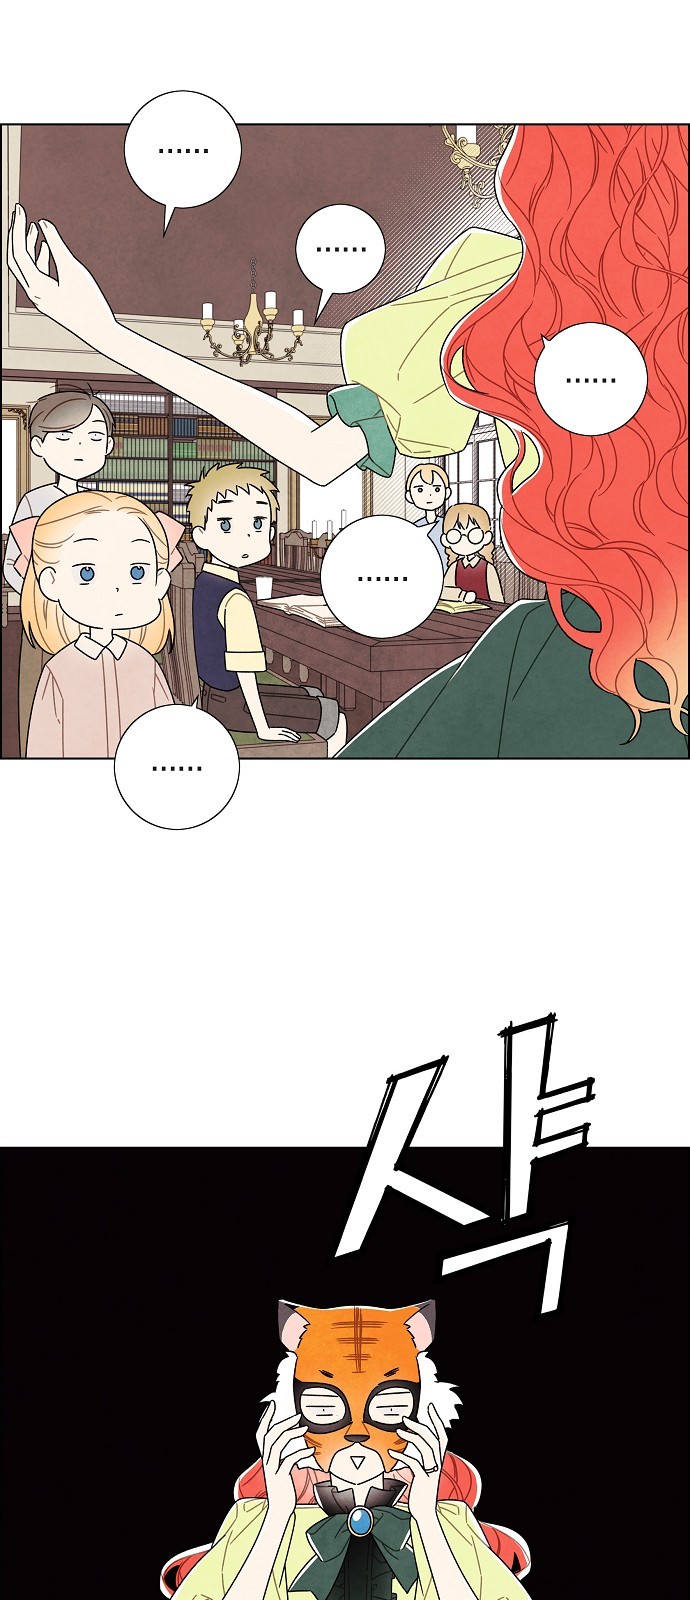 The First Night With the Duke - Chapter 79 - Page 2